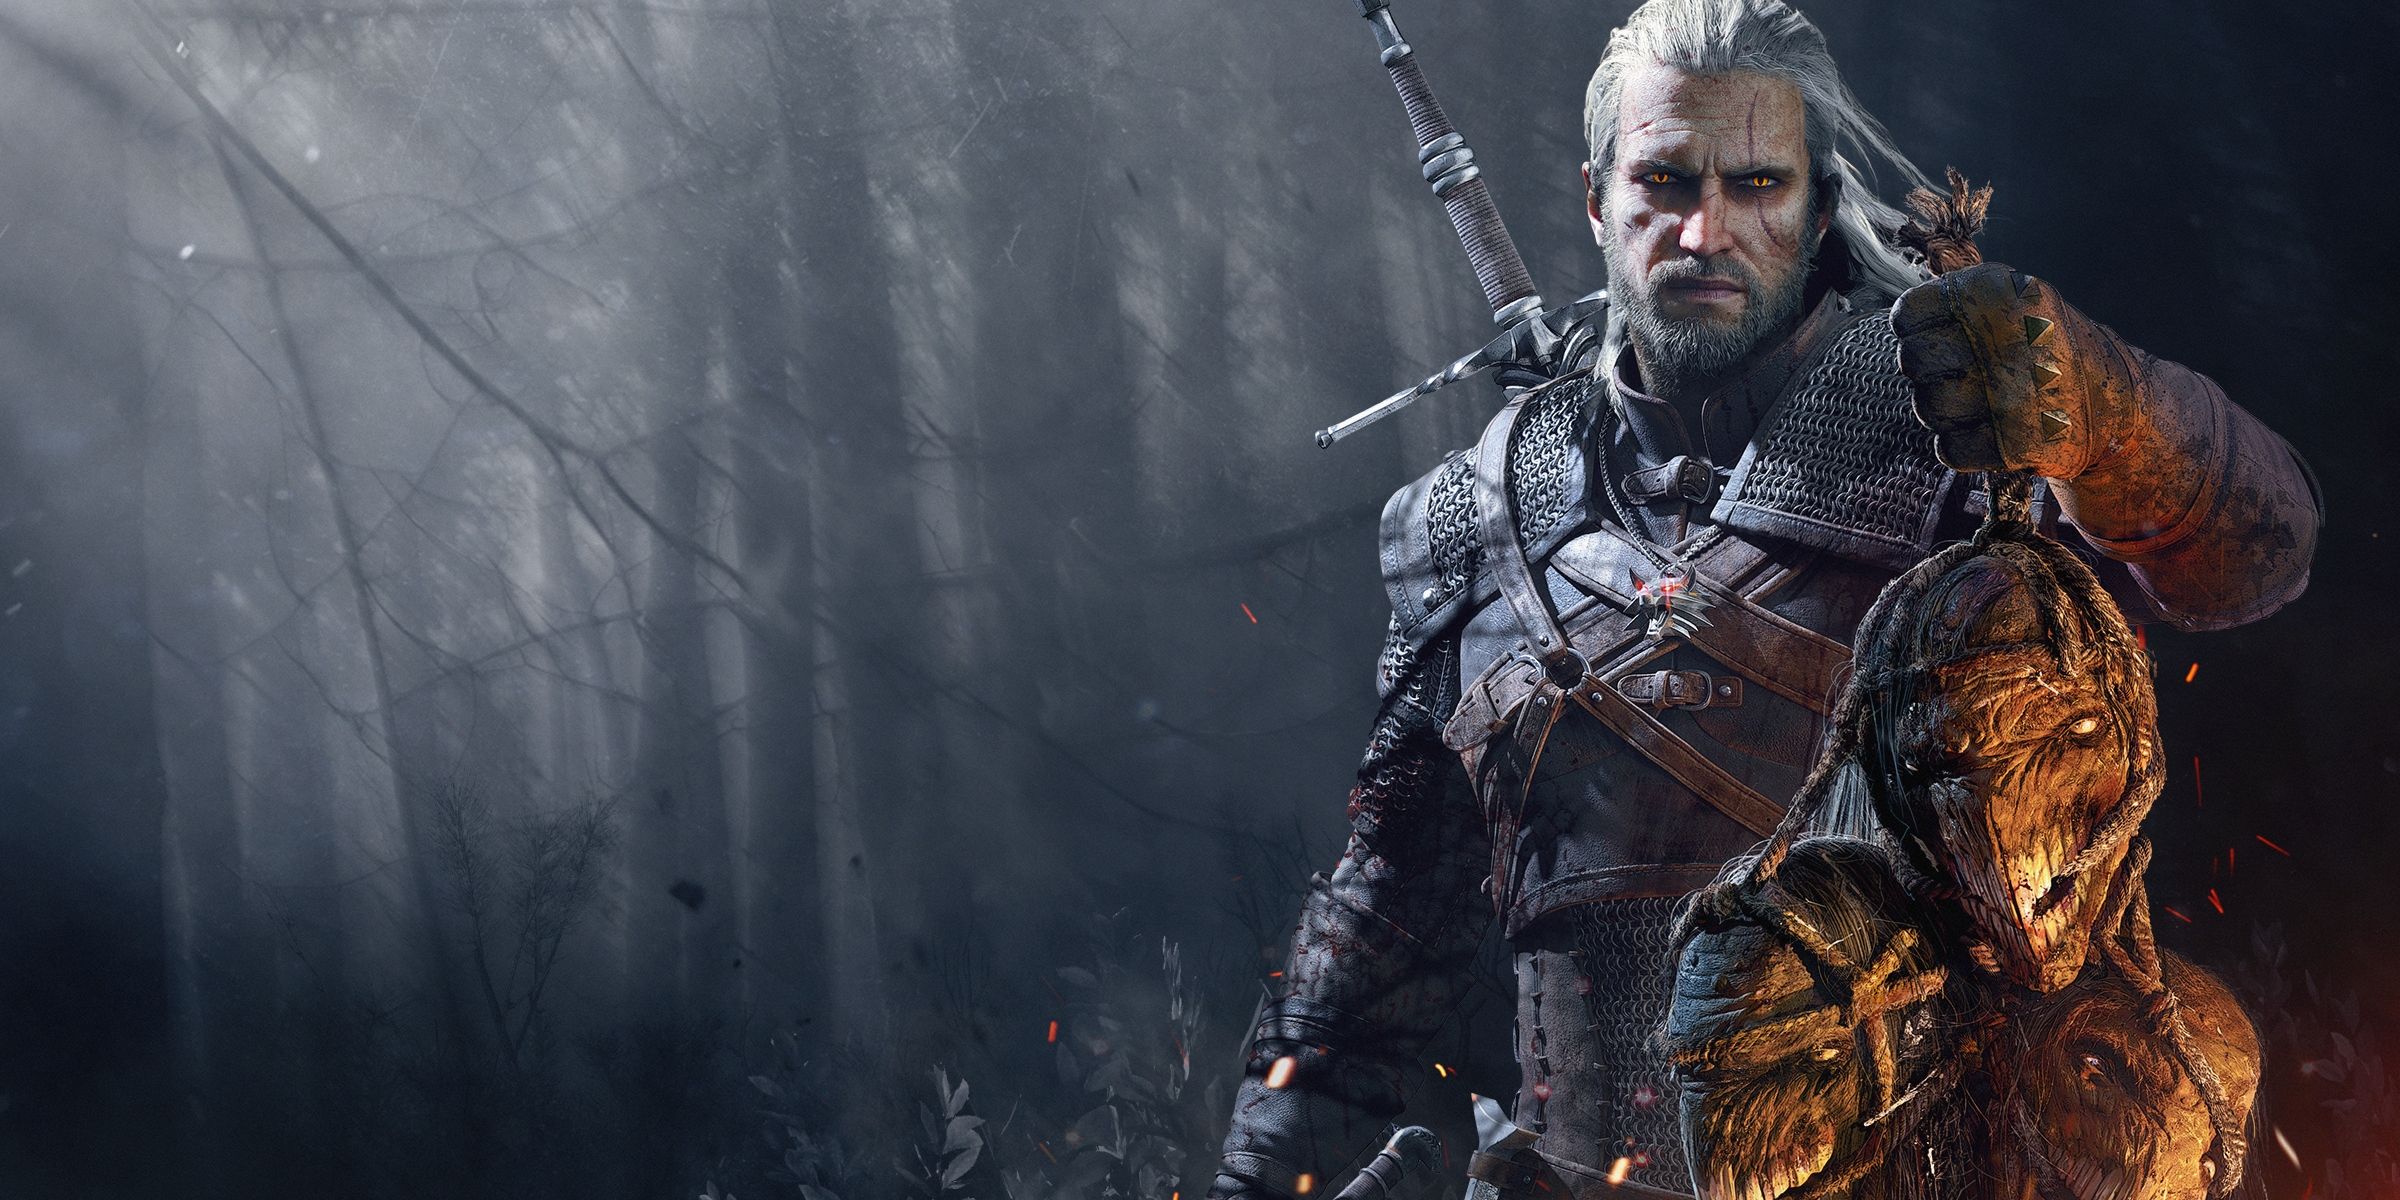 Geralt with the head of slain monsters in The Witcher 3